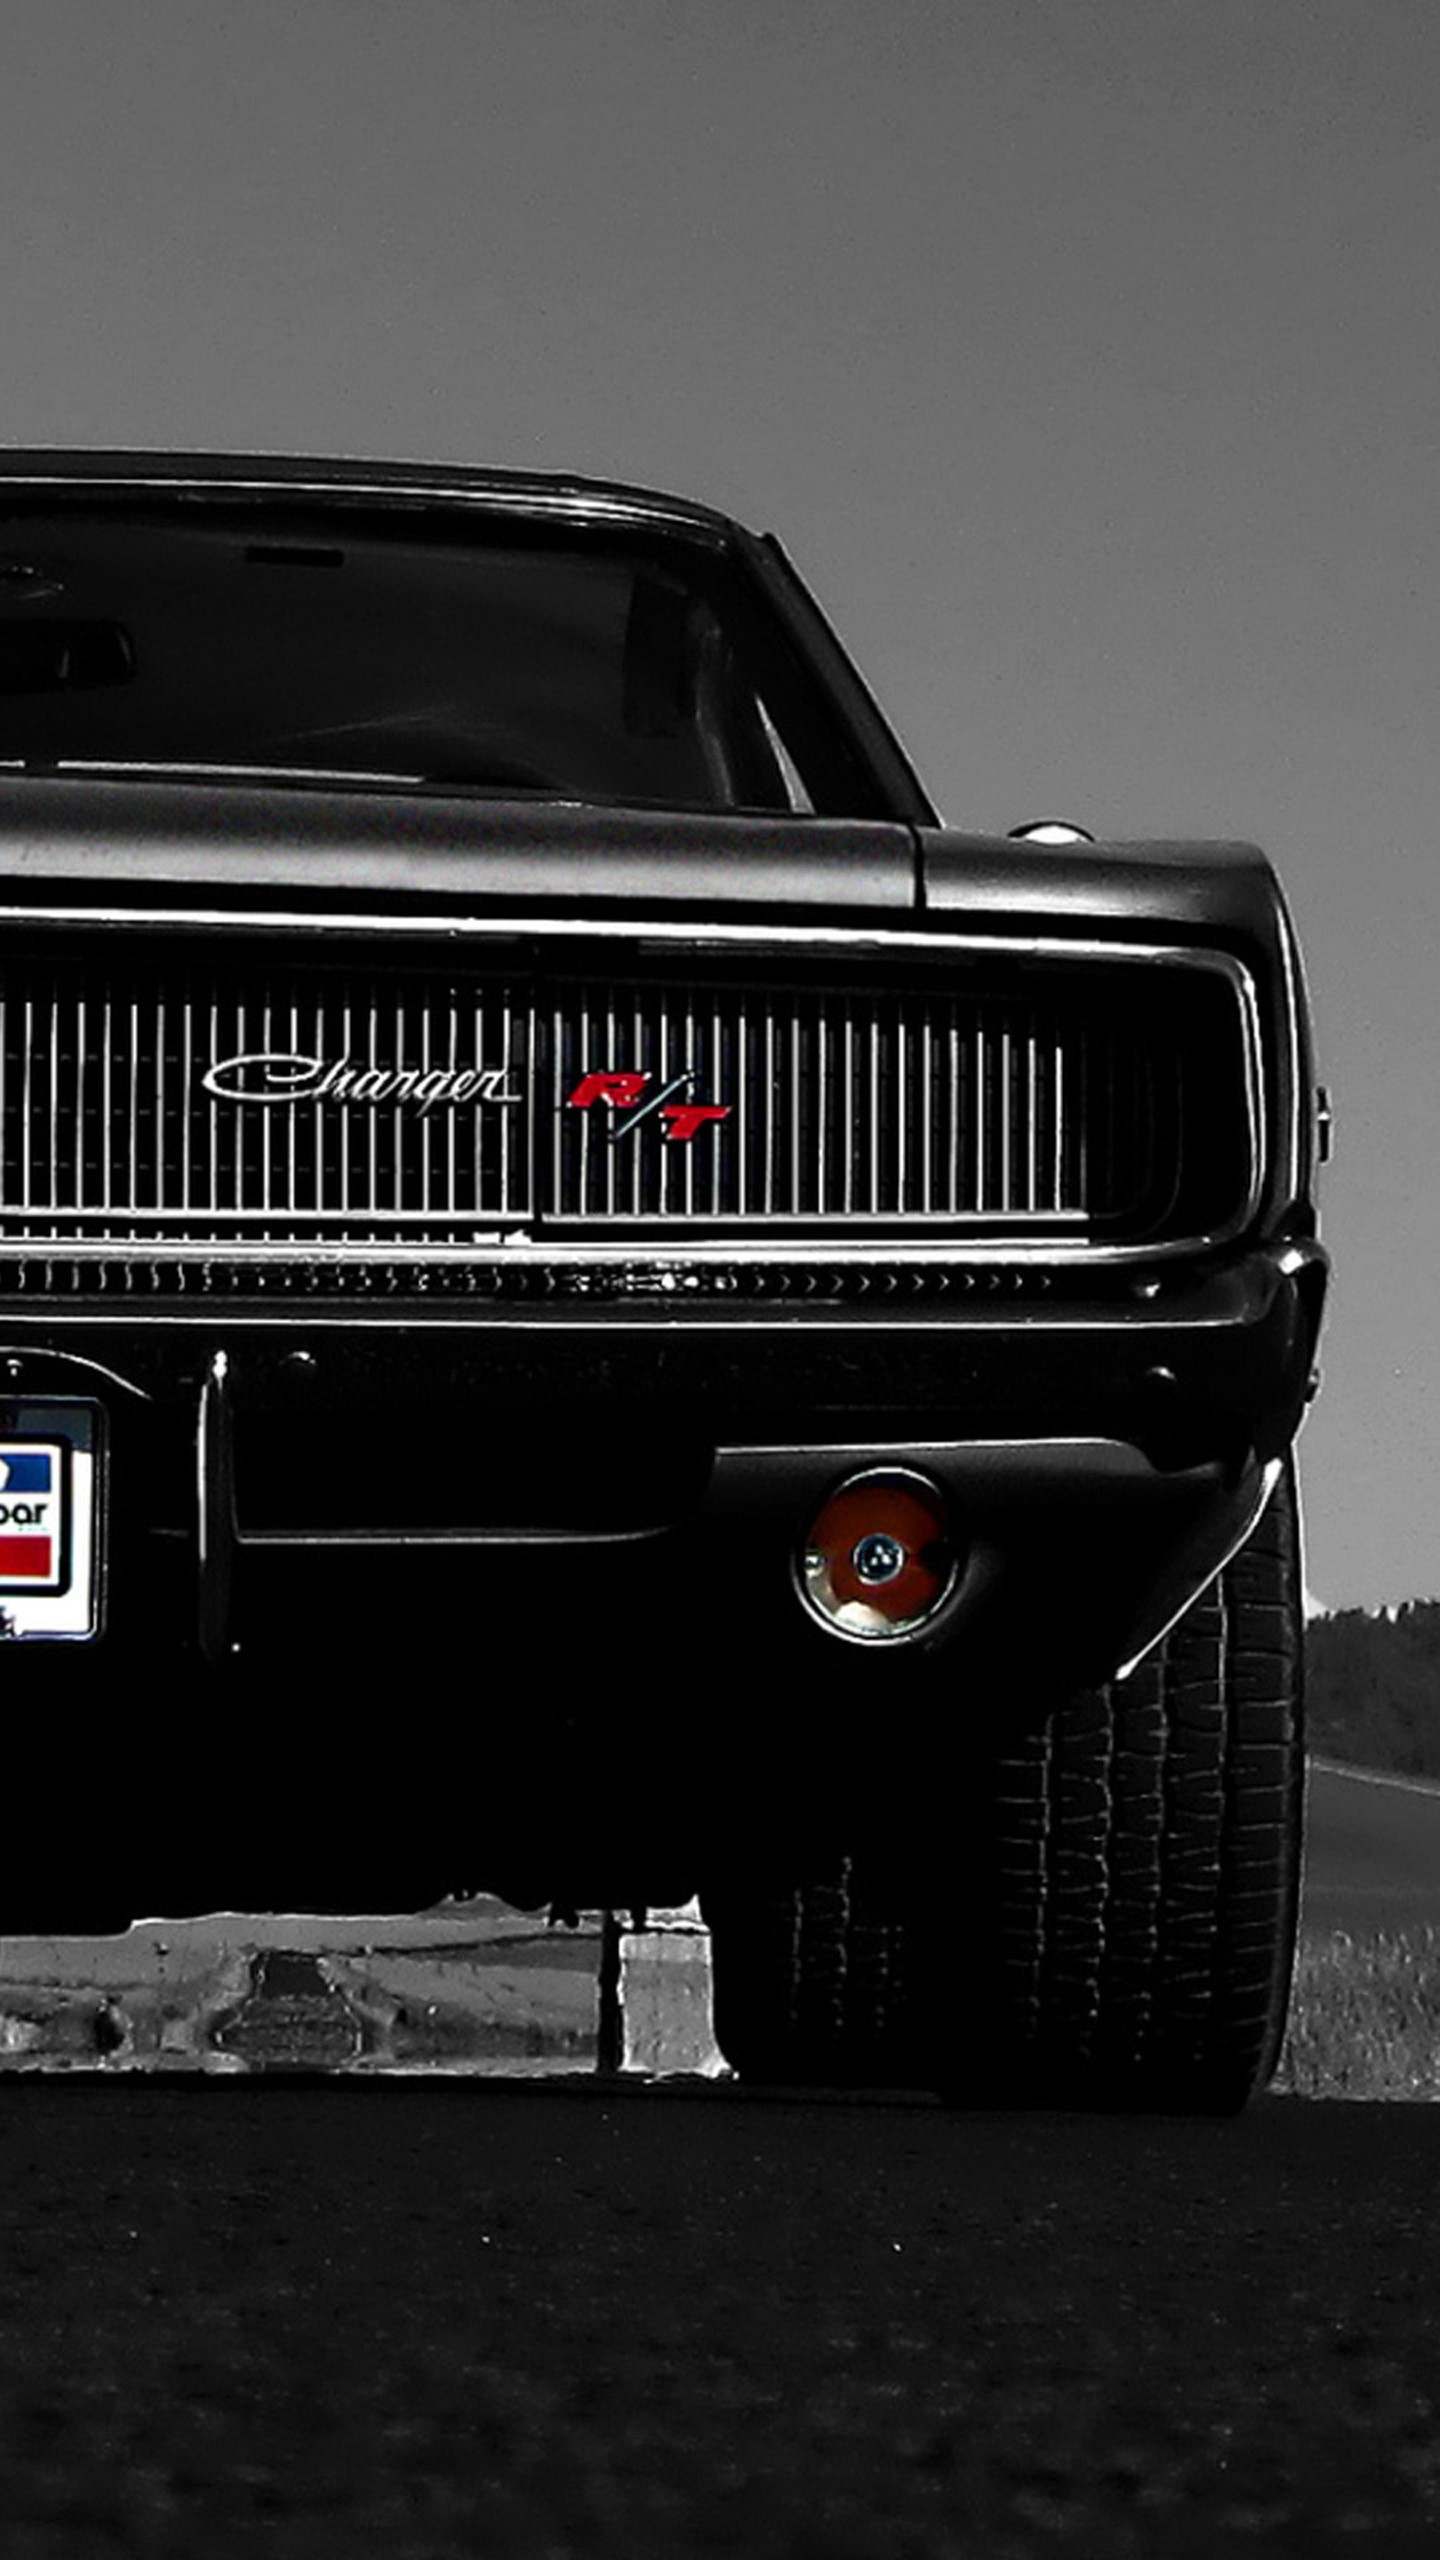 Charger RT Dodge Charger R T Dodge Black Tires Muscle Cars American Cars Car Pop Up Headlights 1440x2560